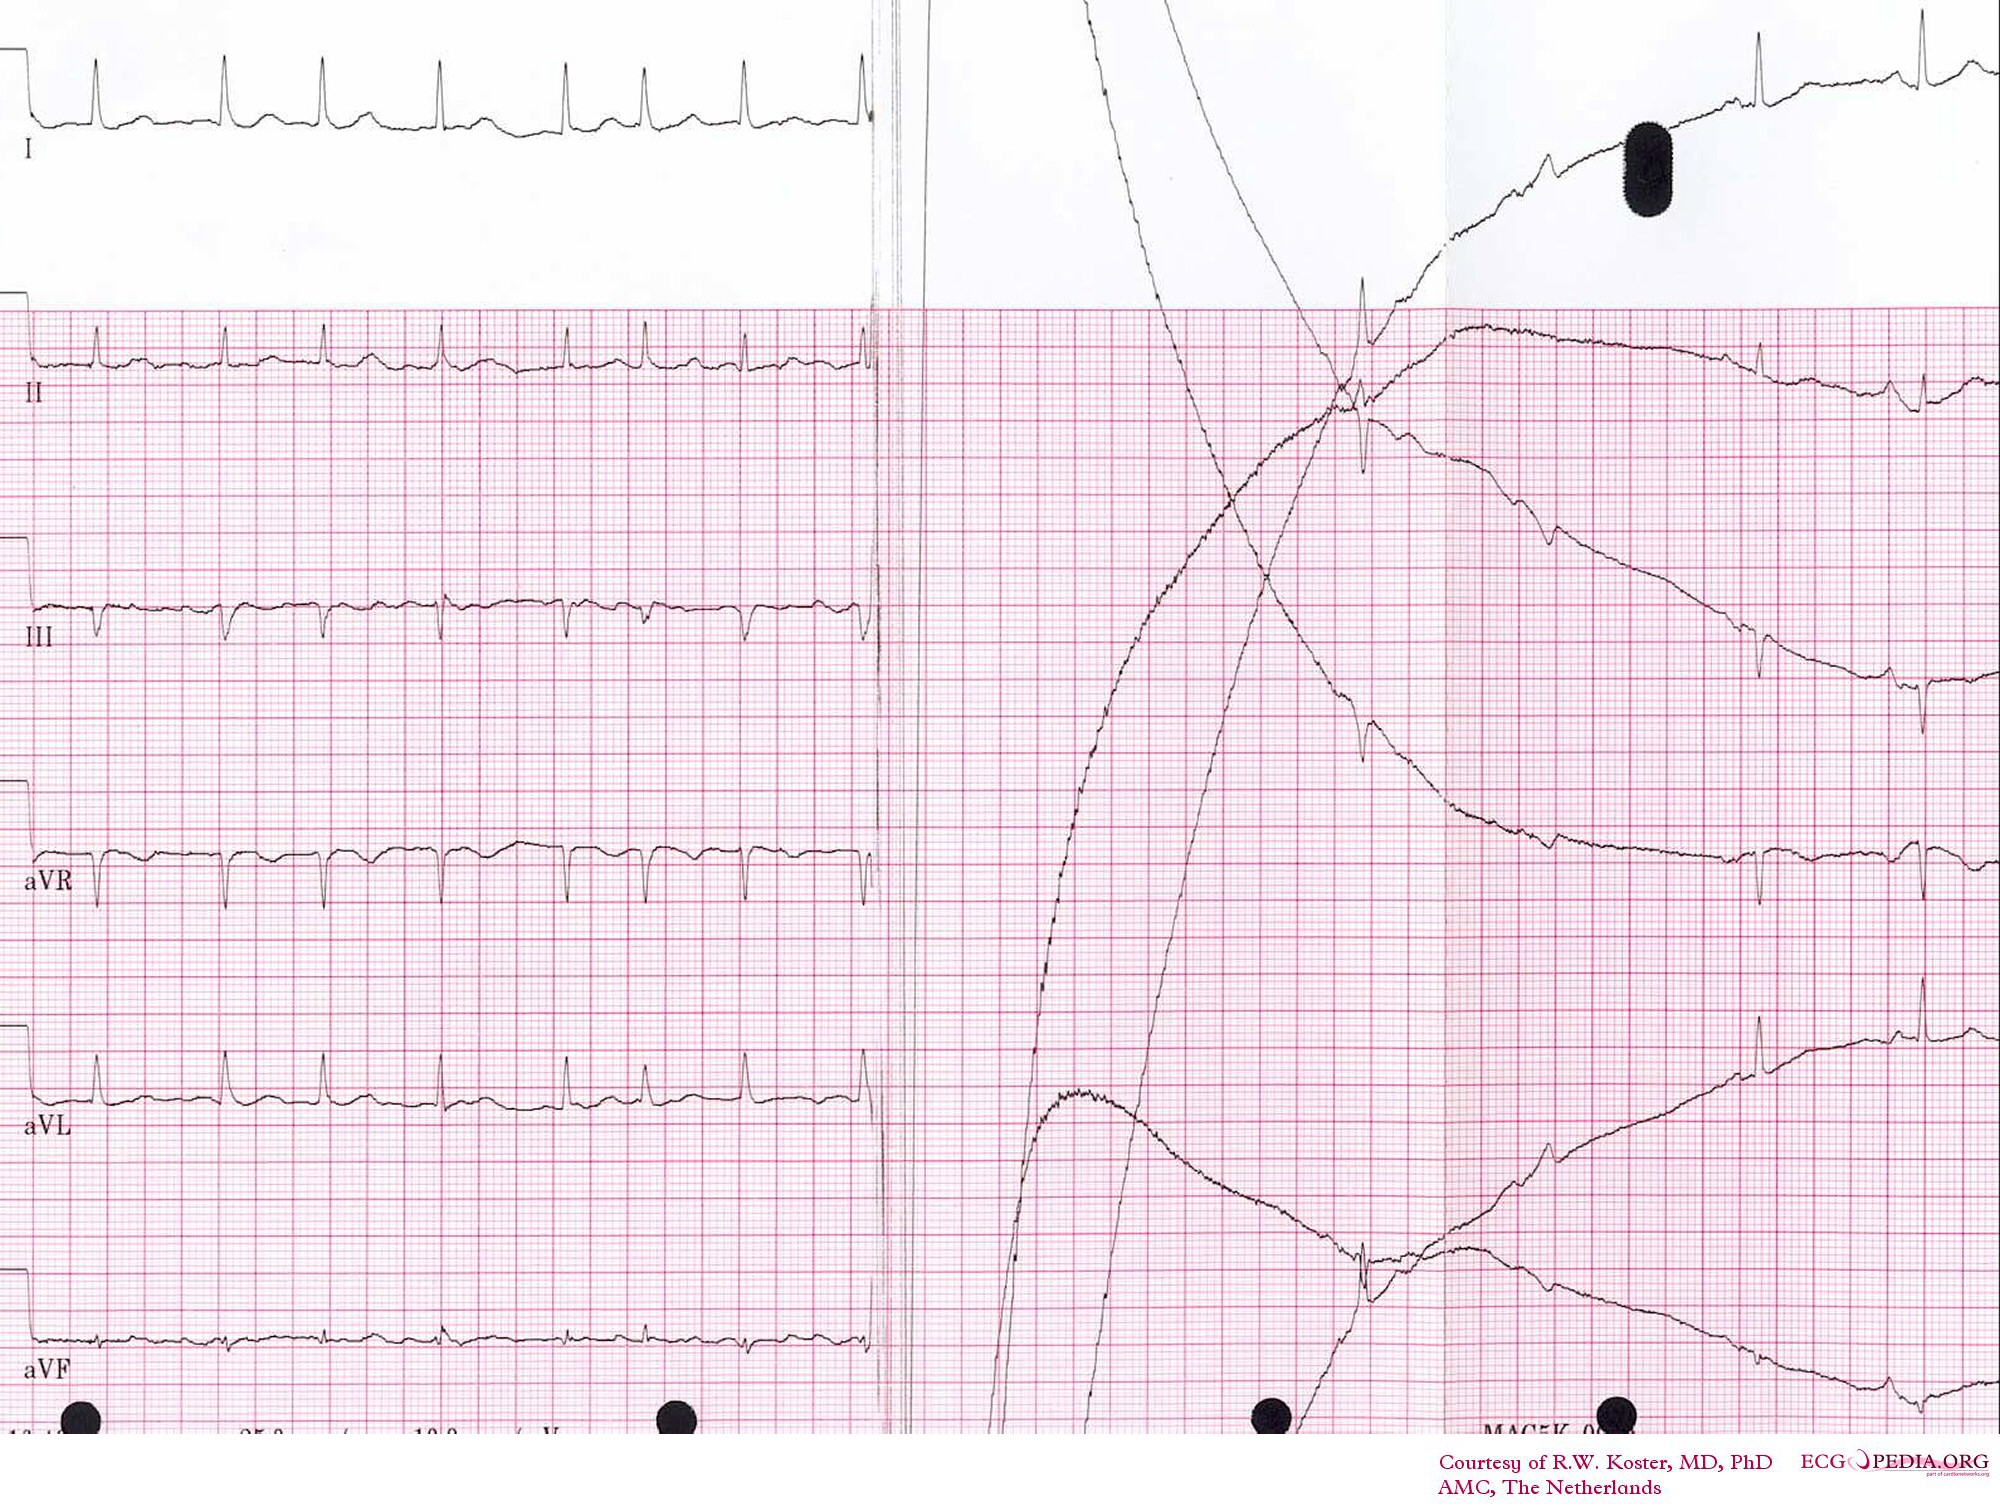 Cardioversion from atrial fibrillation to sinus rhythm, with clear baseline drift.